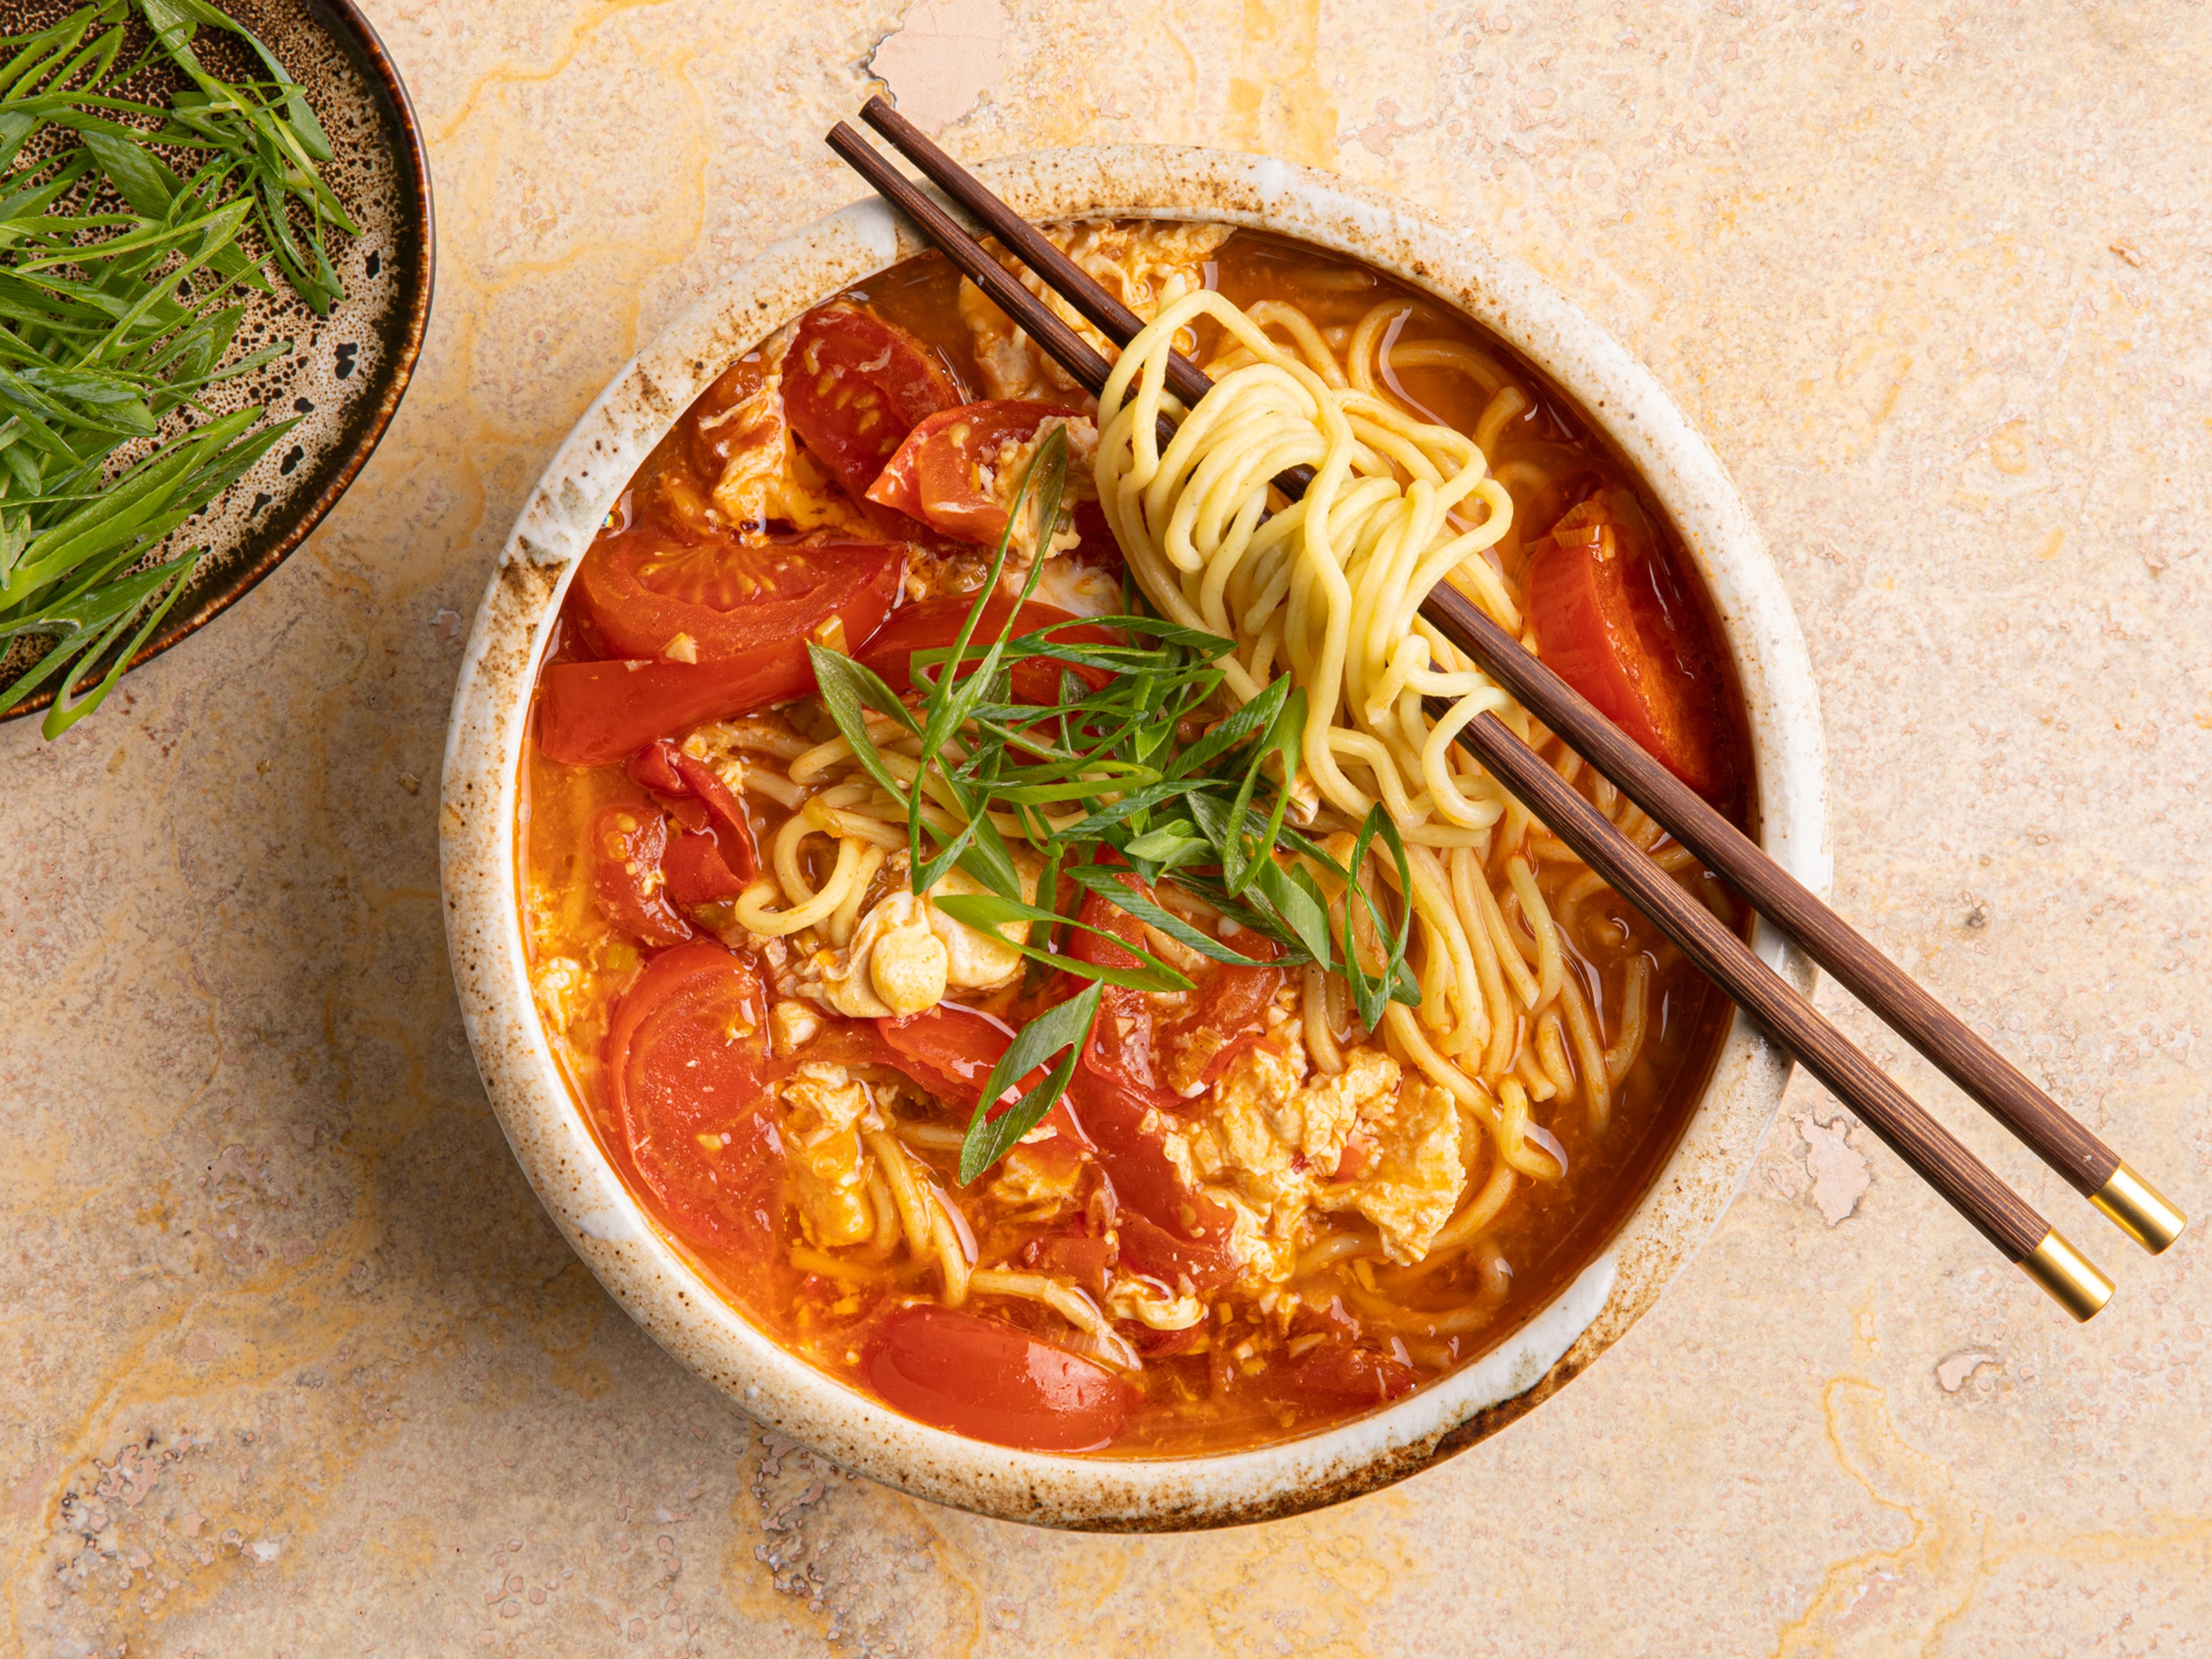 Tomato and egg noodle soup